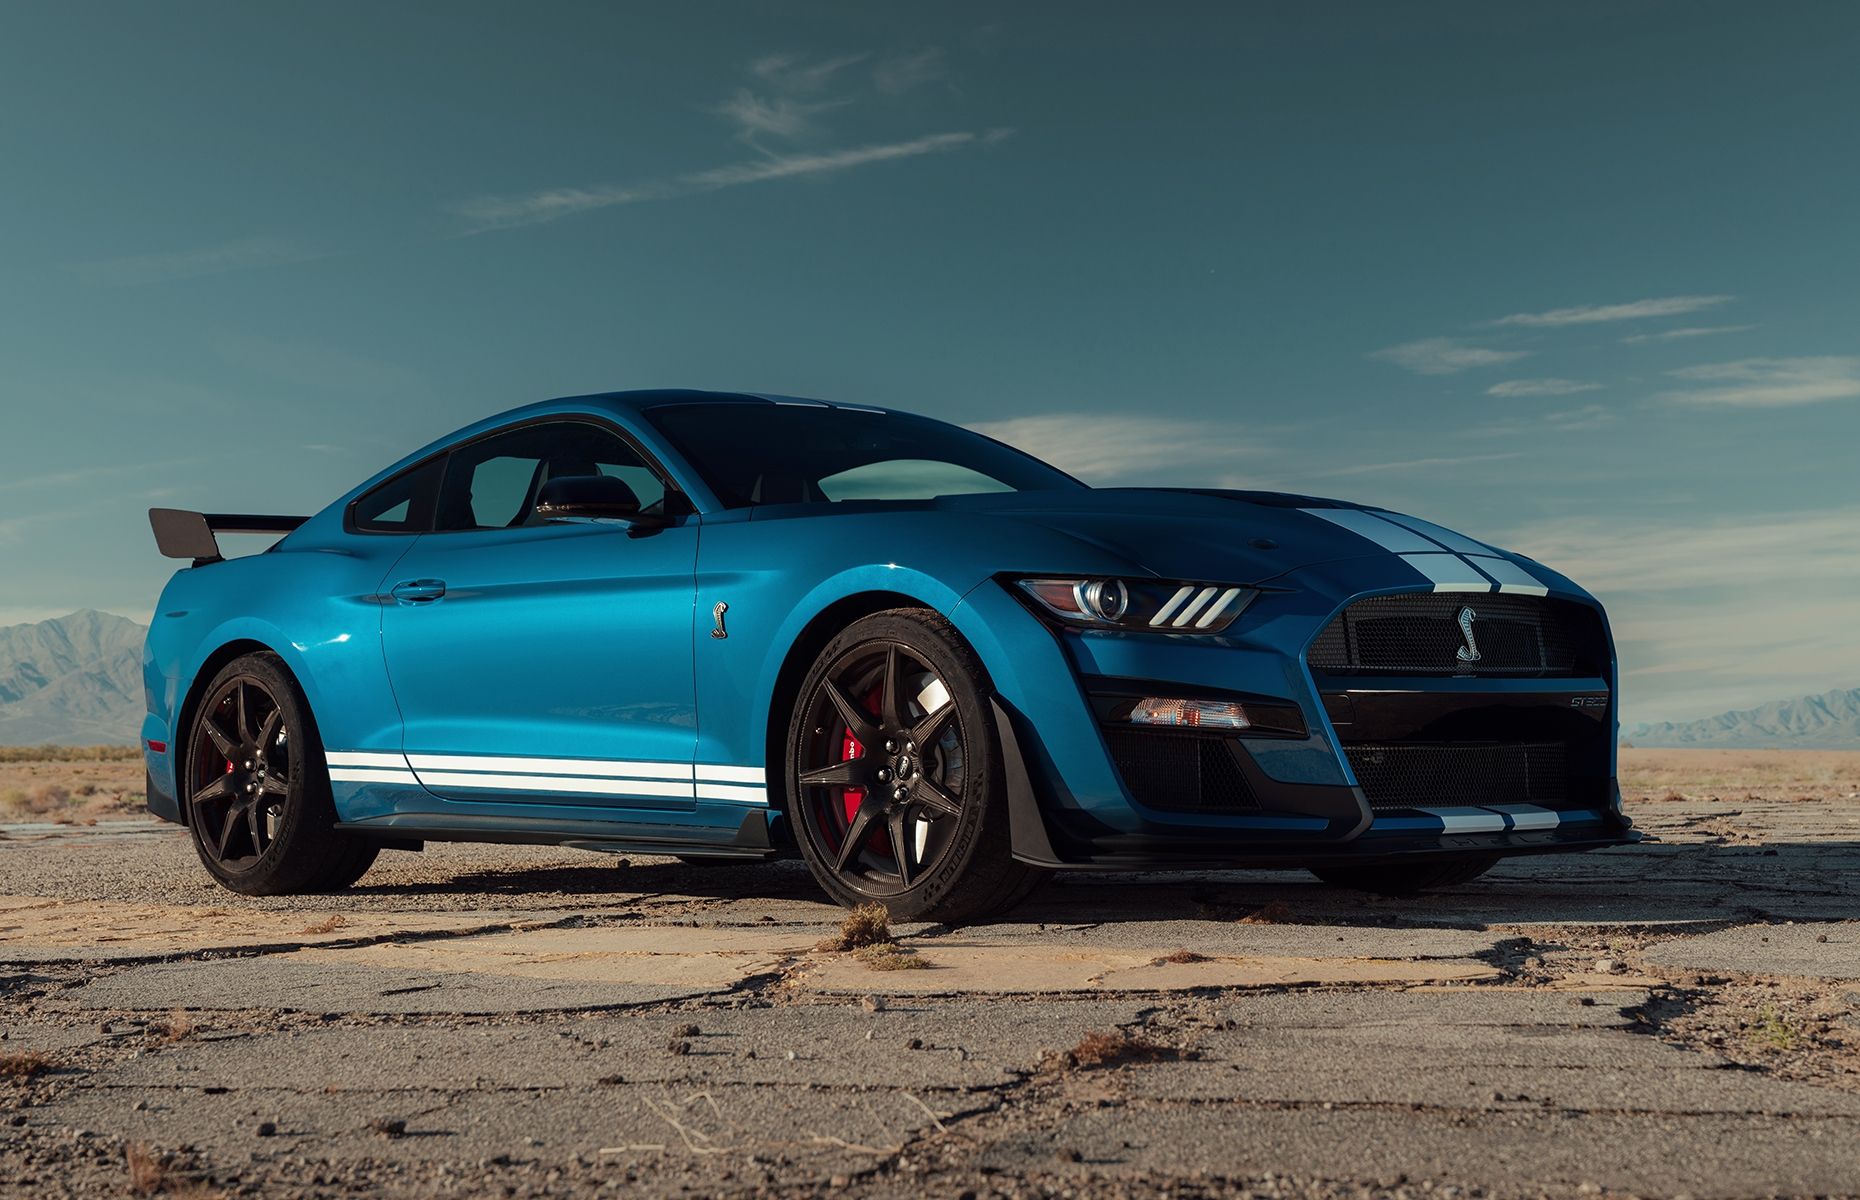 Ford Mustang Shelby GT500 2021 Specs, Prices, Photo & More